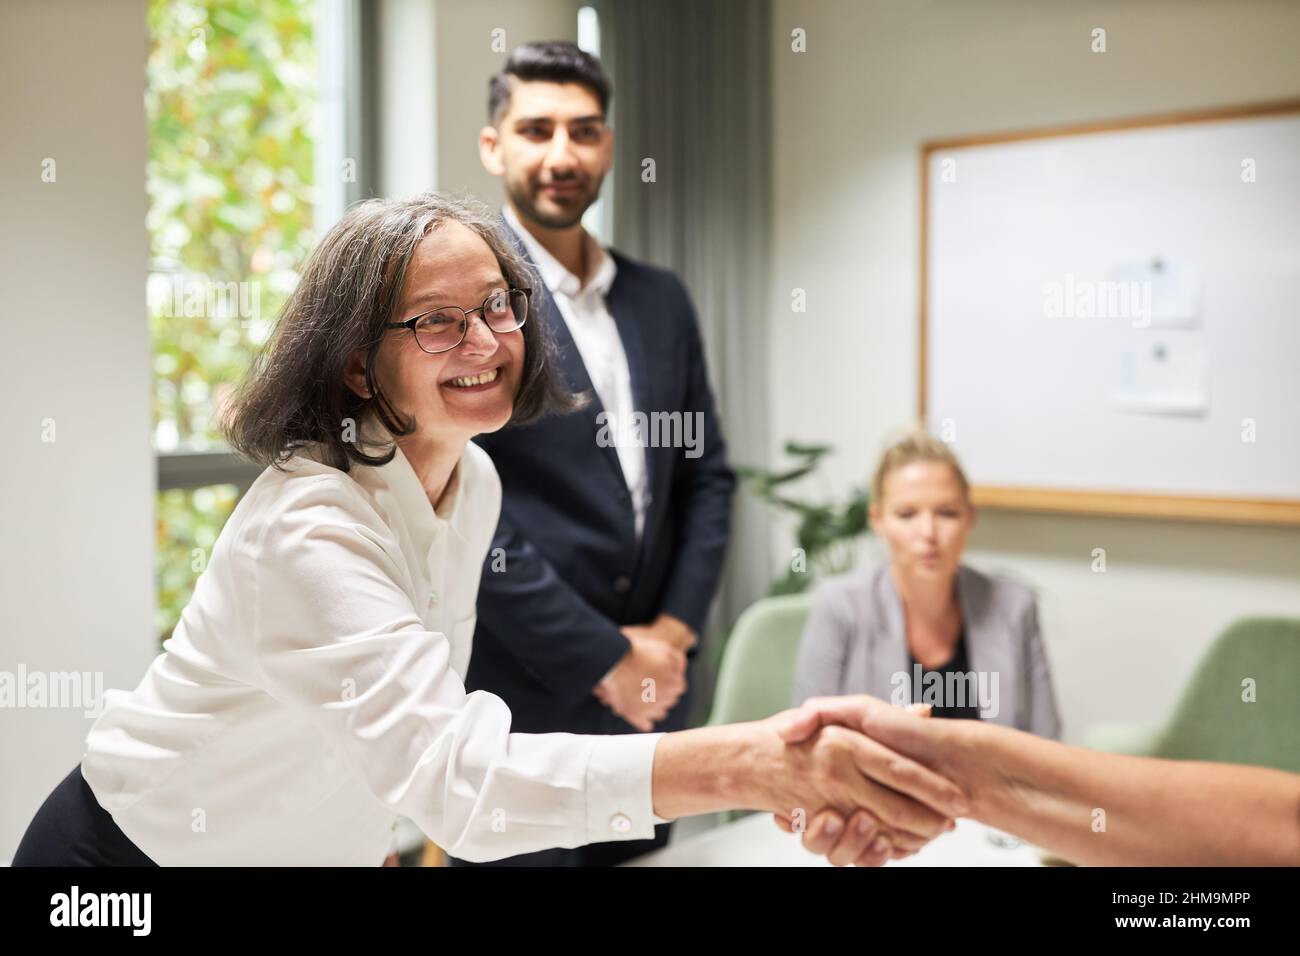 Happy business woman shaking hands in the office as a symbol of greeting and congratulations Stock Photo